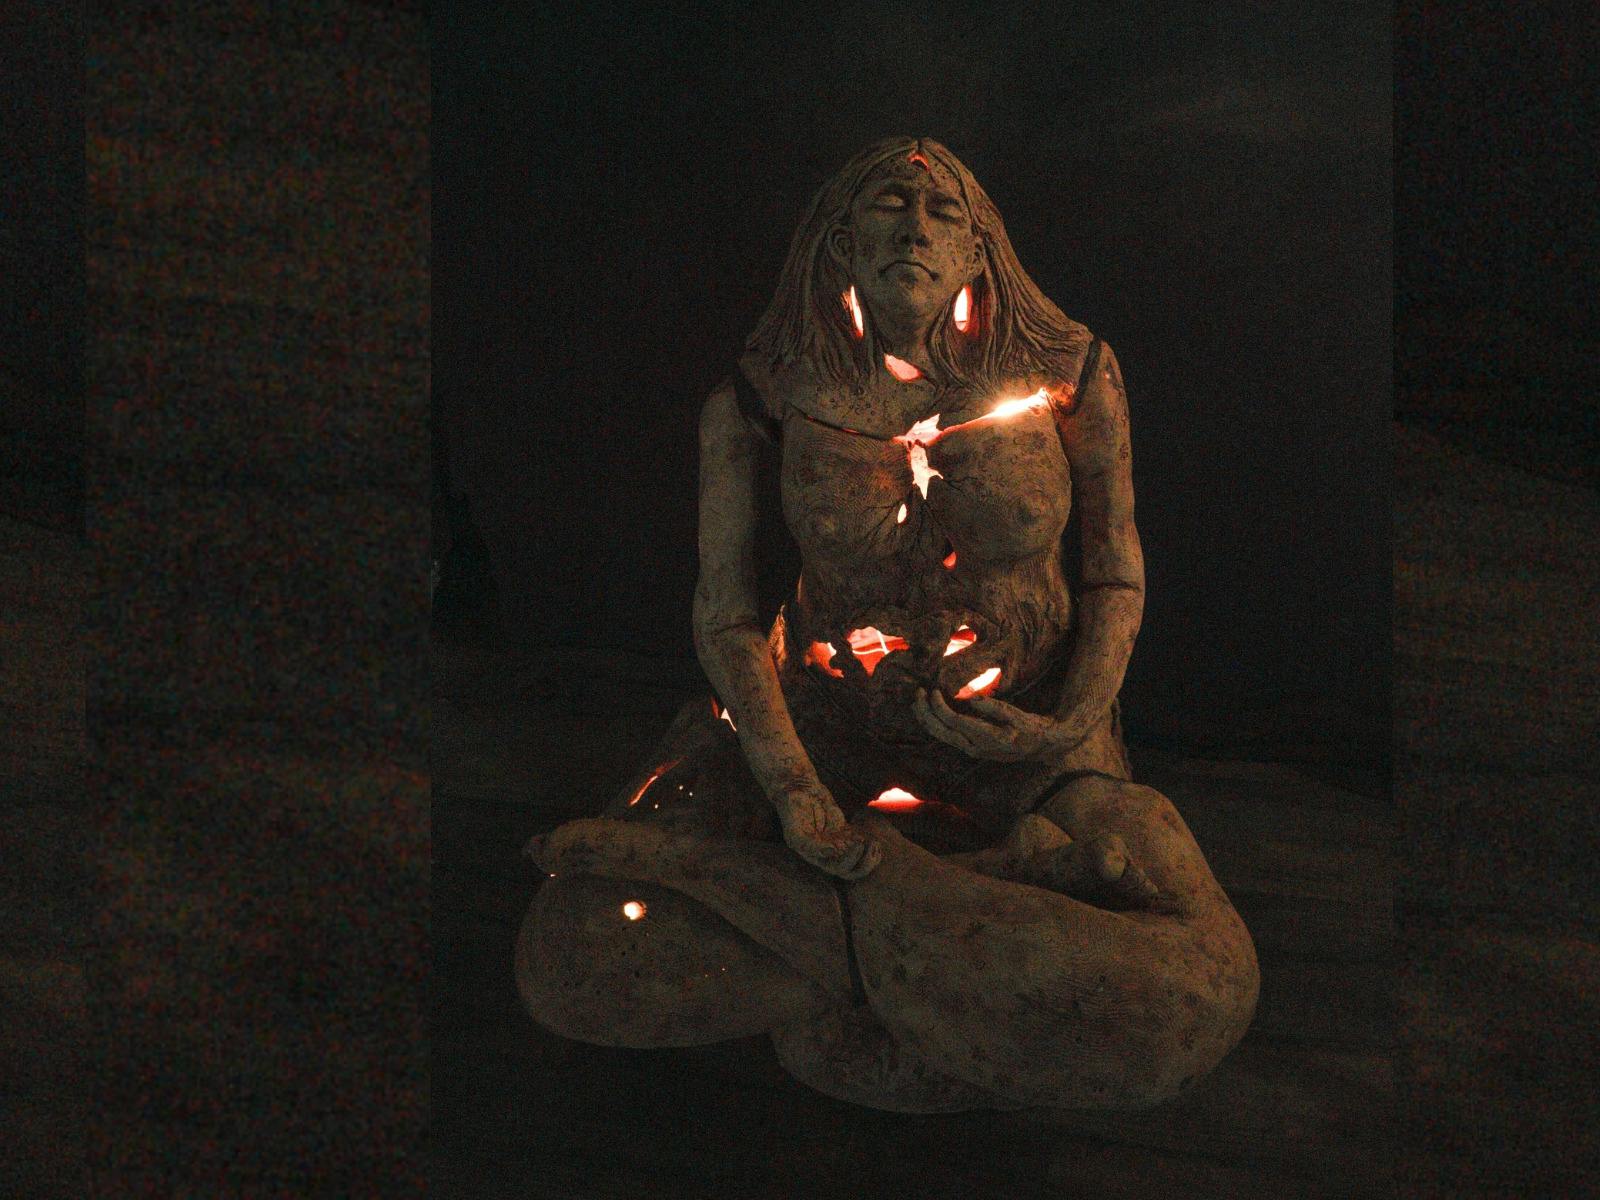 Lee-Anne Peters' - Light Shining from within lamp - ceramics - major work